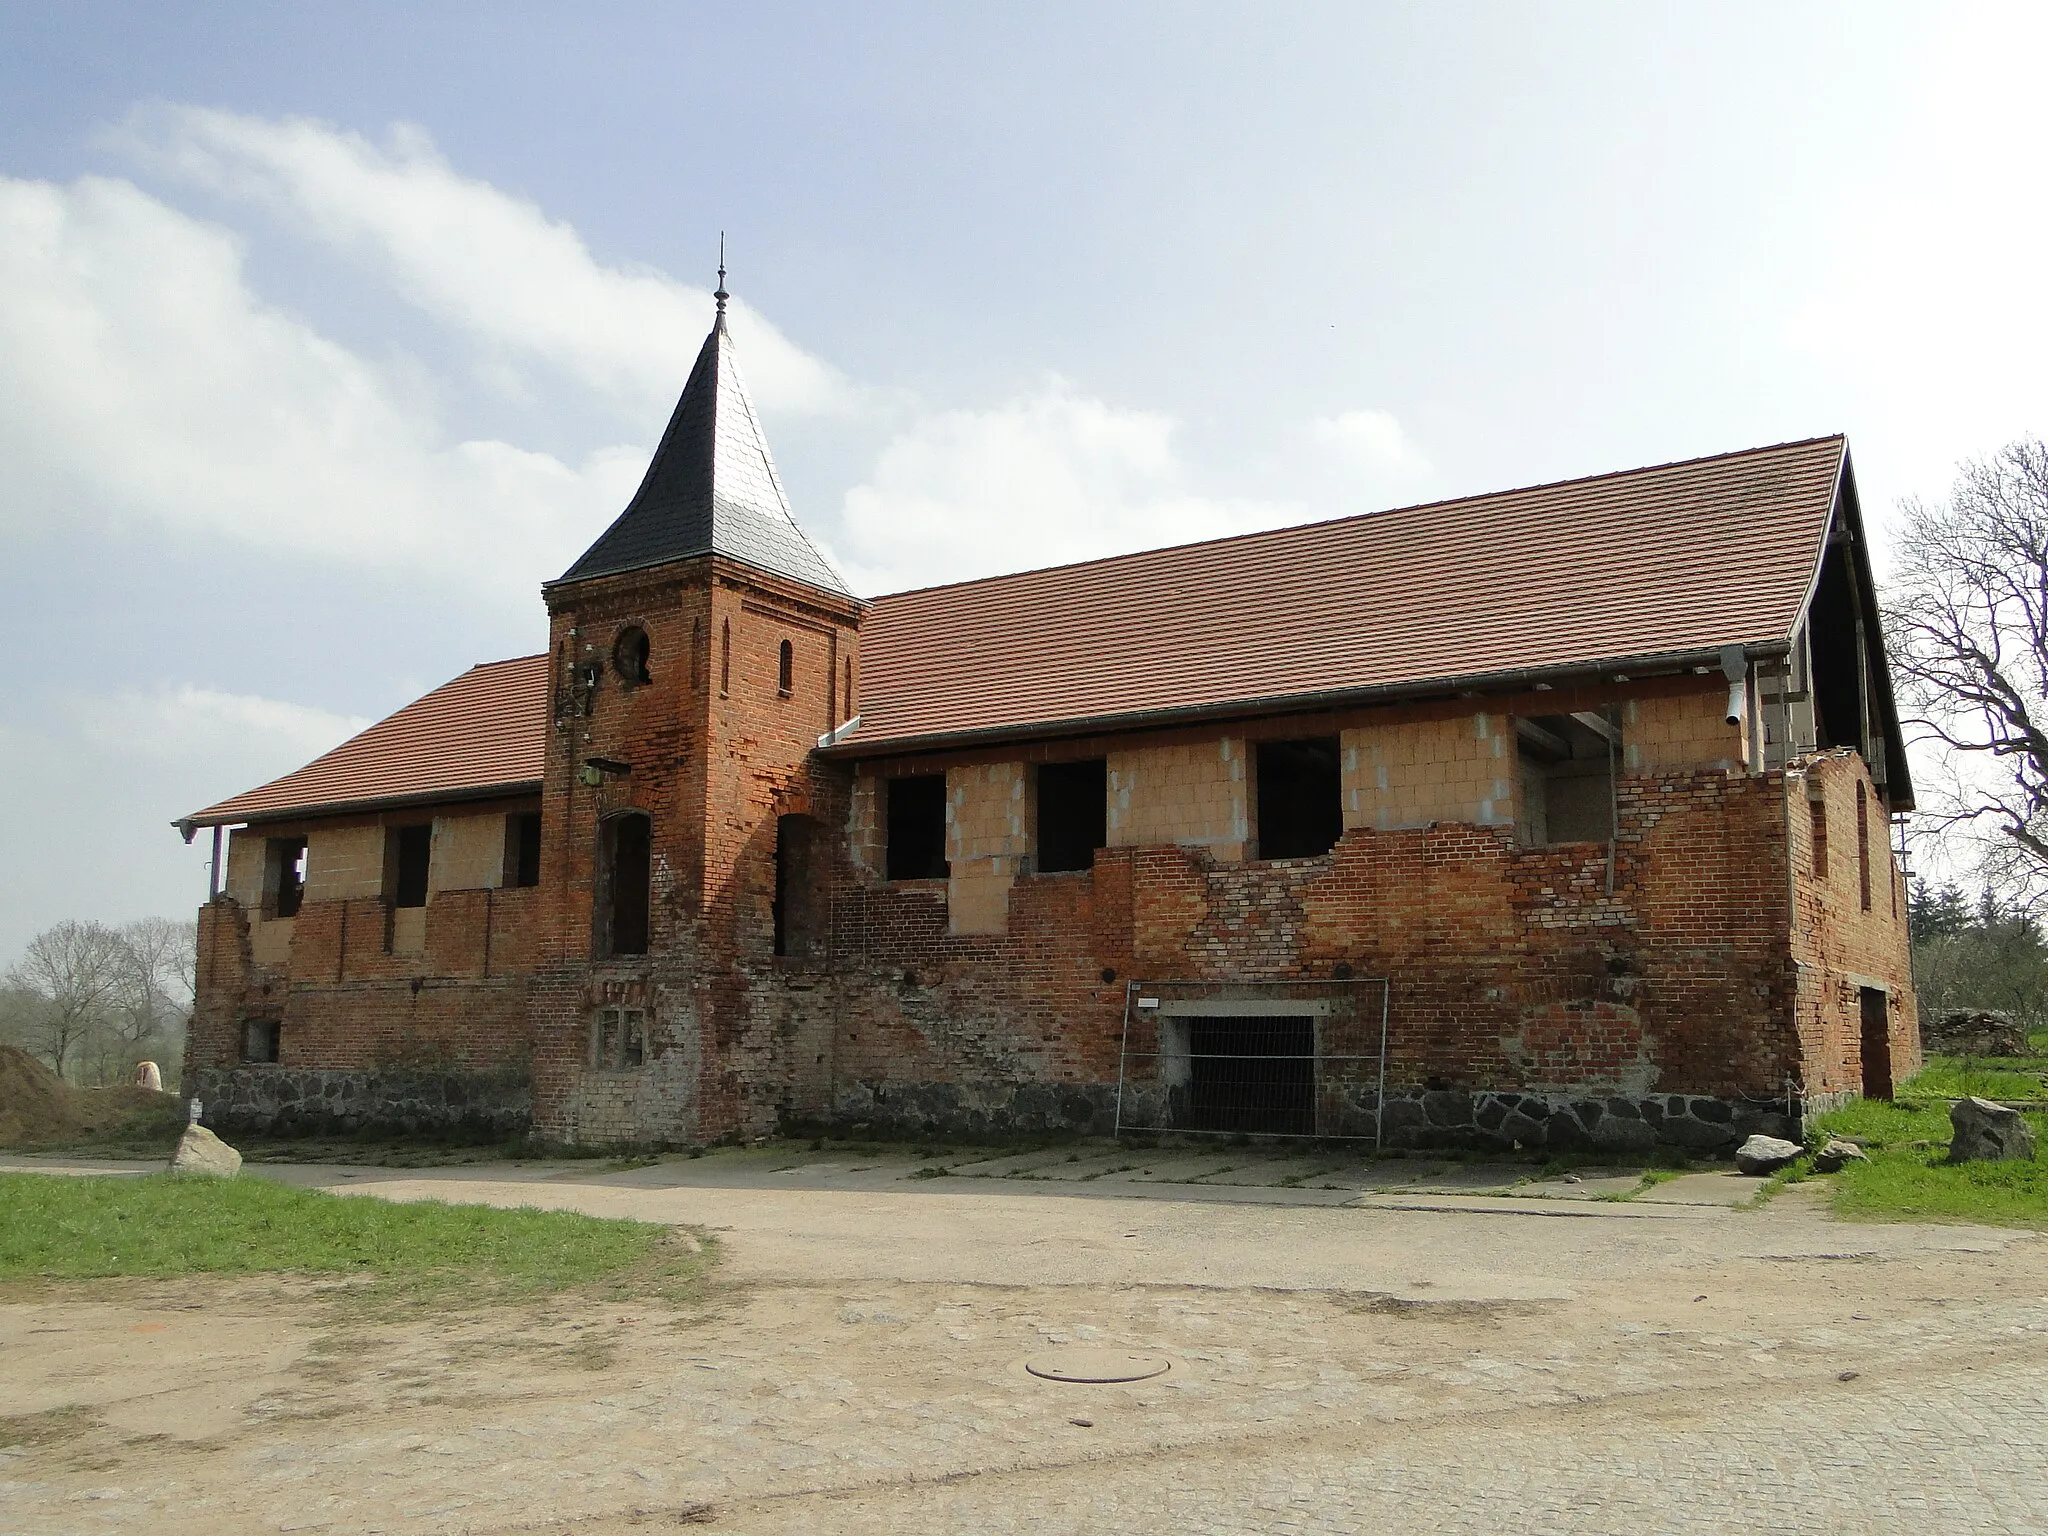 Photo showing: Turmspeicher (warehouse with tower) in Müsselmow, district Ludwigslust-Parchim, Mecklenburg-Vorpommern, Germany